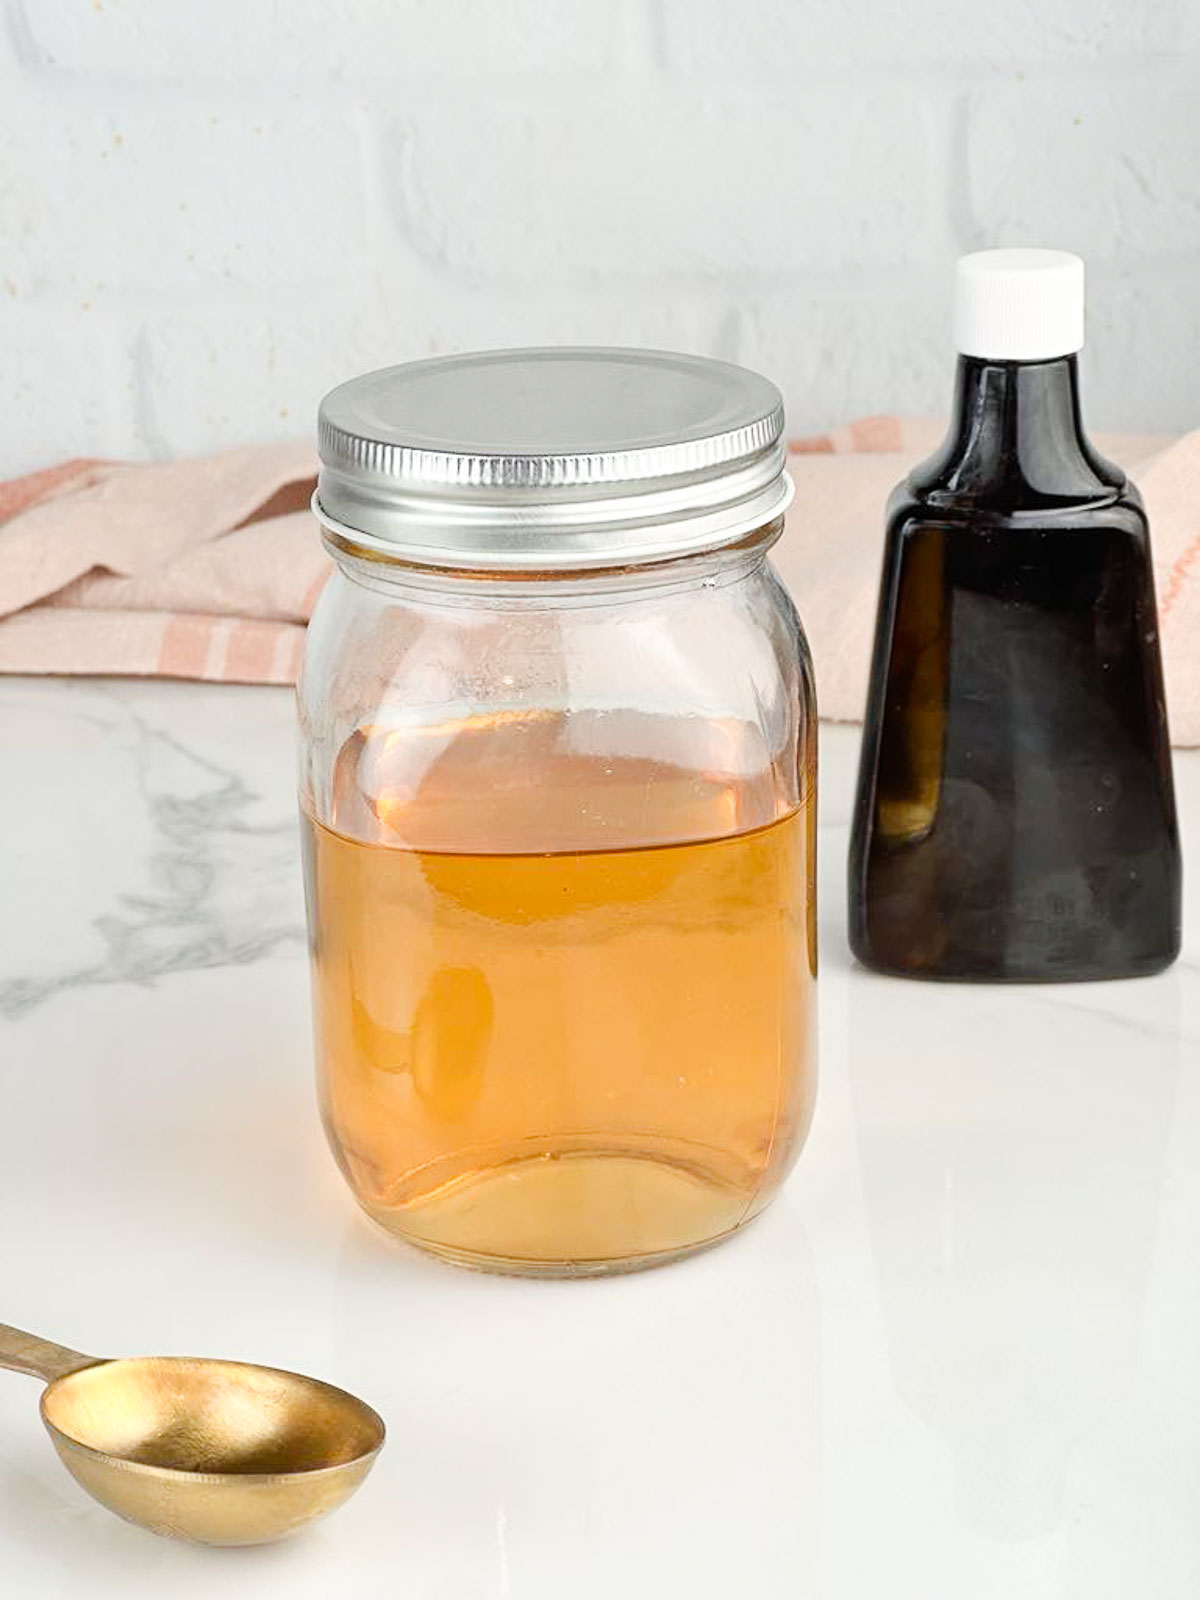 A jar of vanilla simple syrup ready to be used in baked goods or drinks